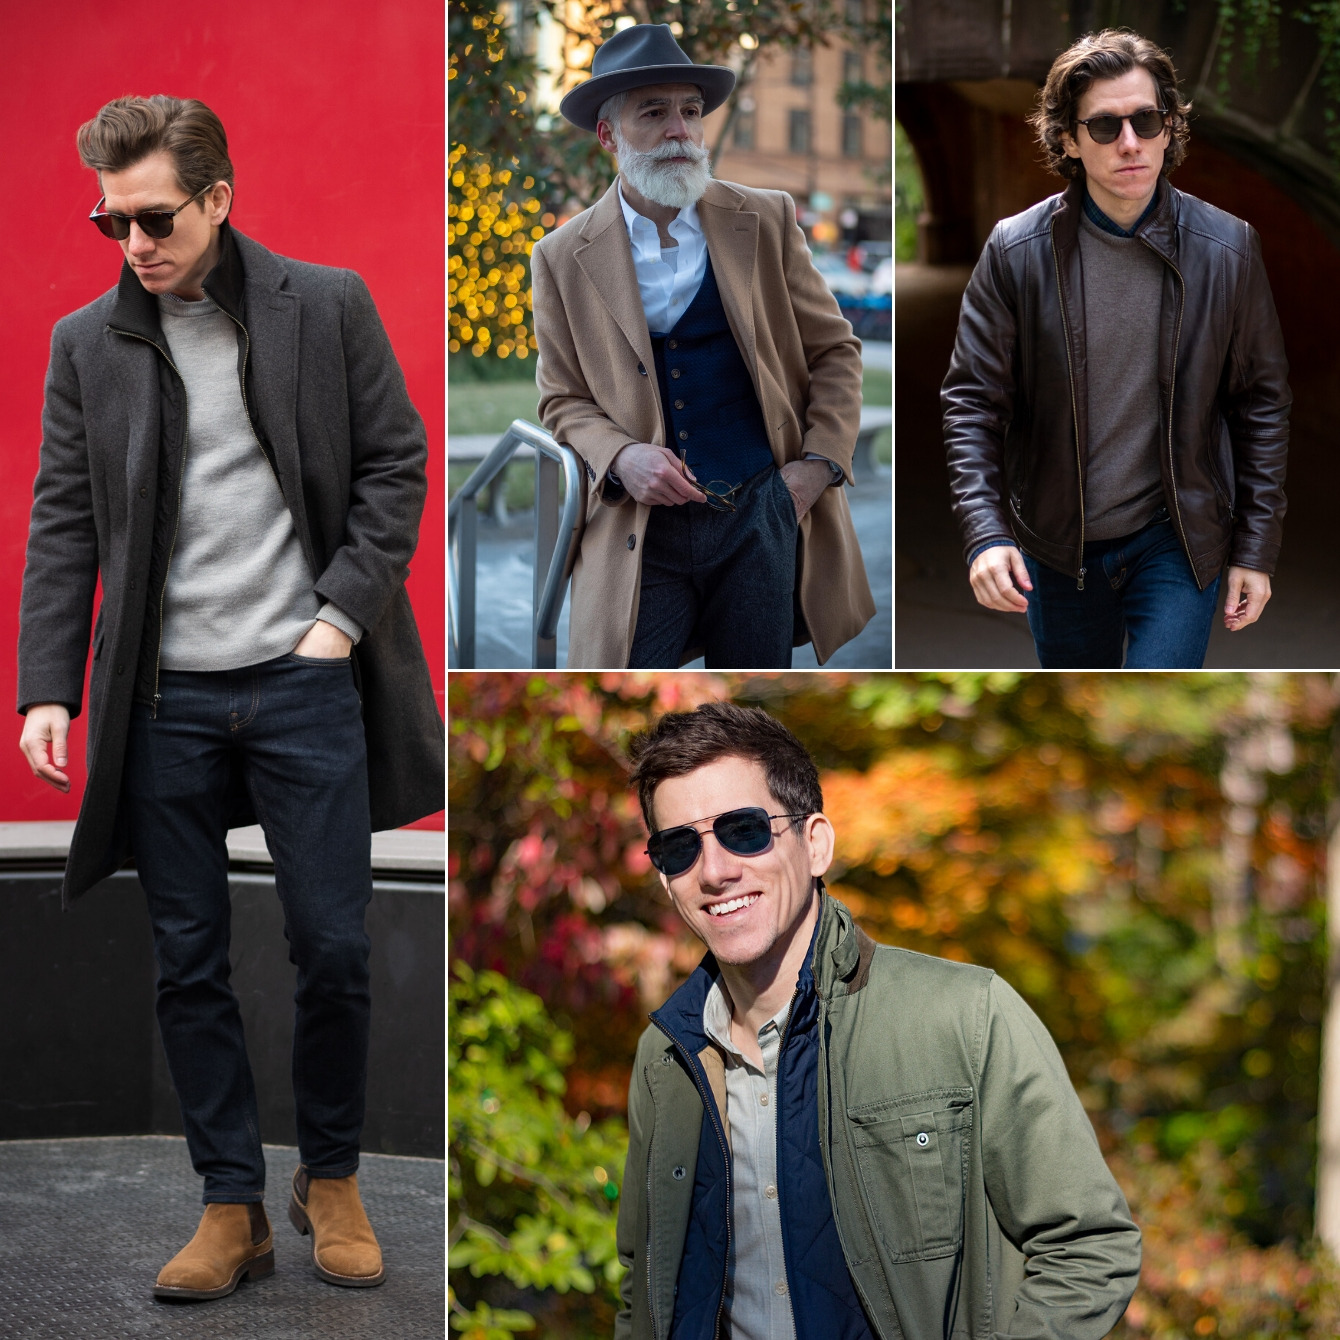 How to Wear Layers During Fall and Winter + 16 Outfit Ideas